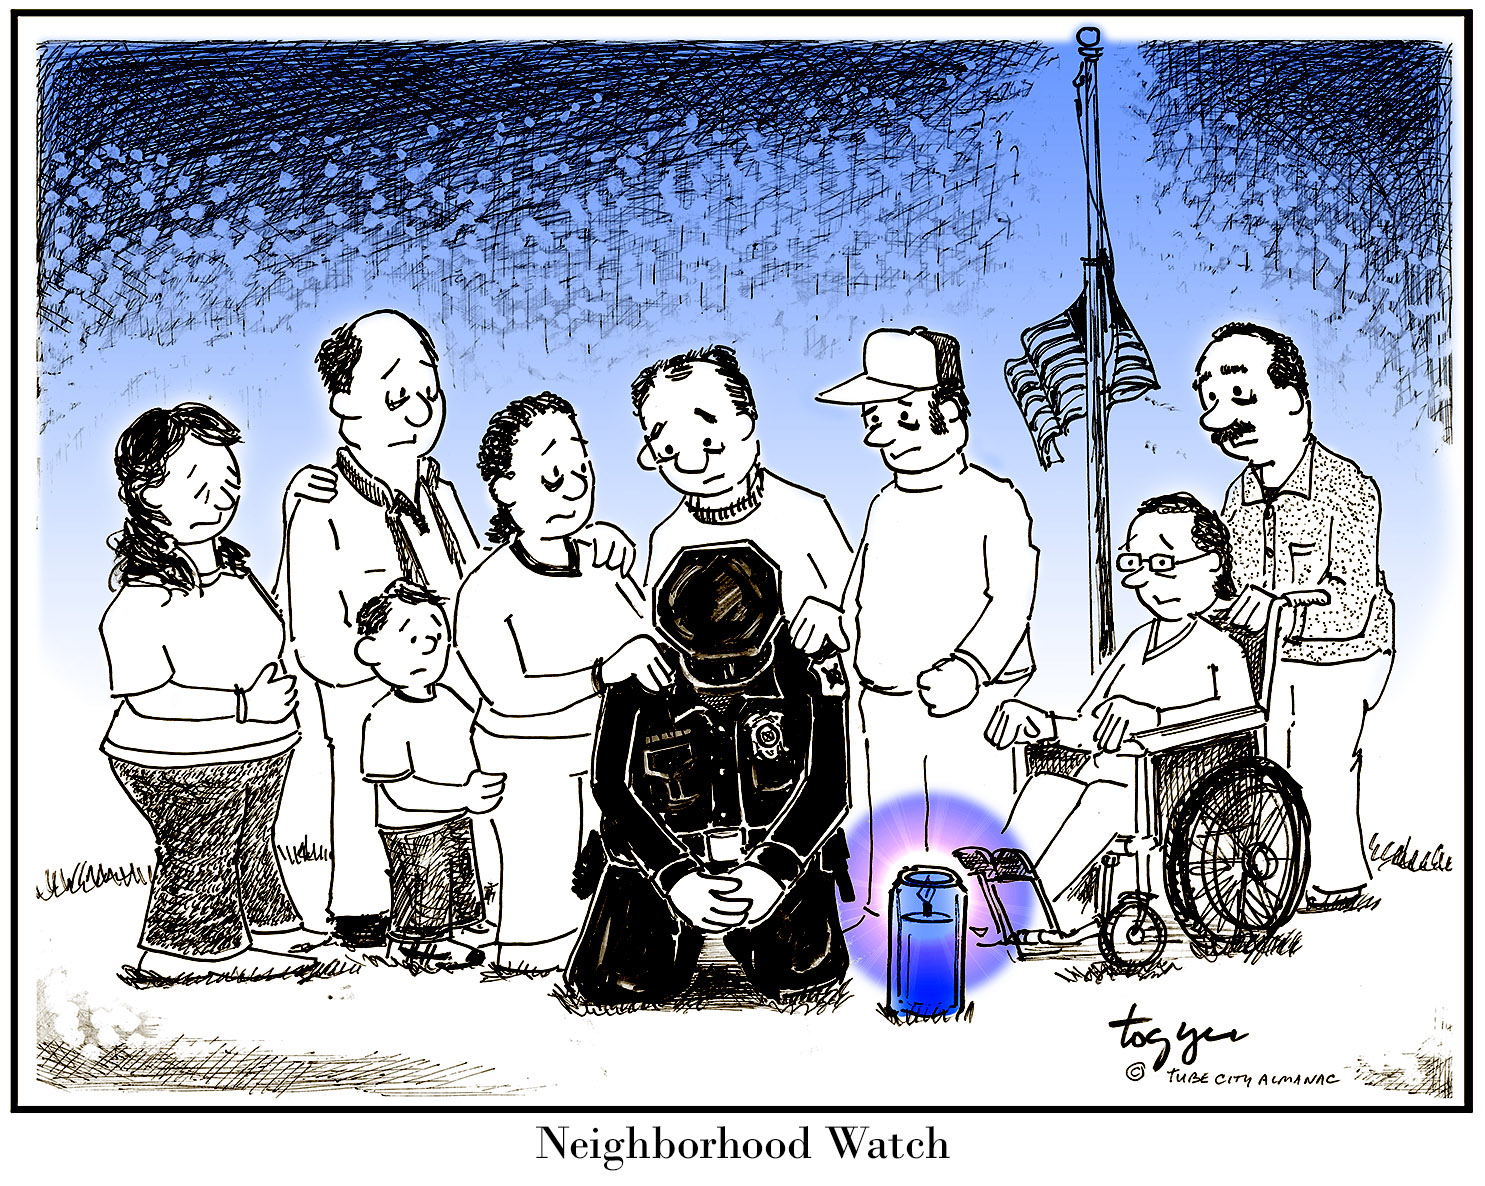 Cartoon depicts a group of people surrounding a police officer, who is praying with their head bowed. Title is Neighborhood Watch